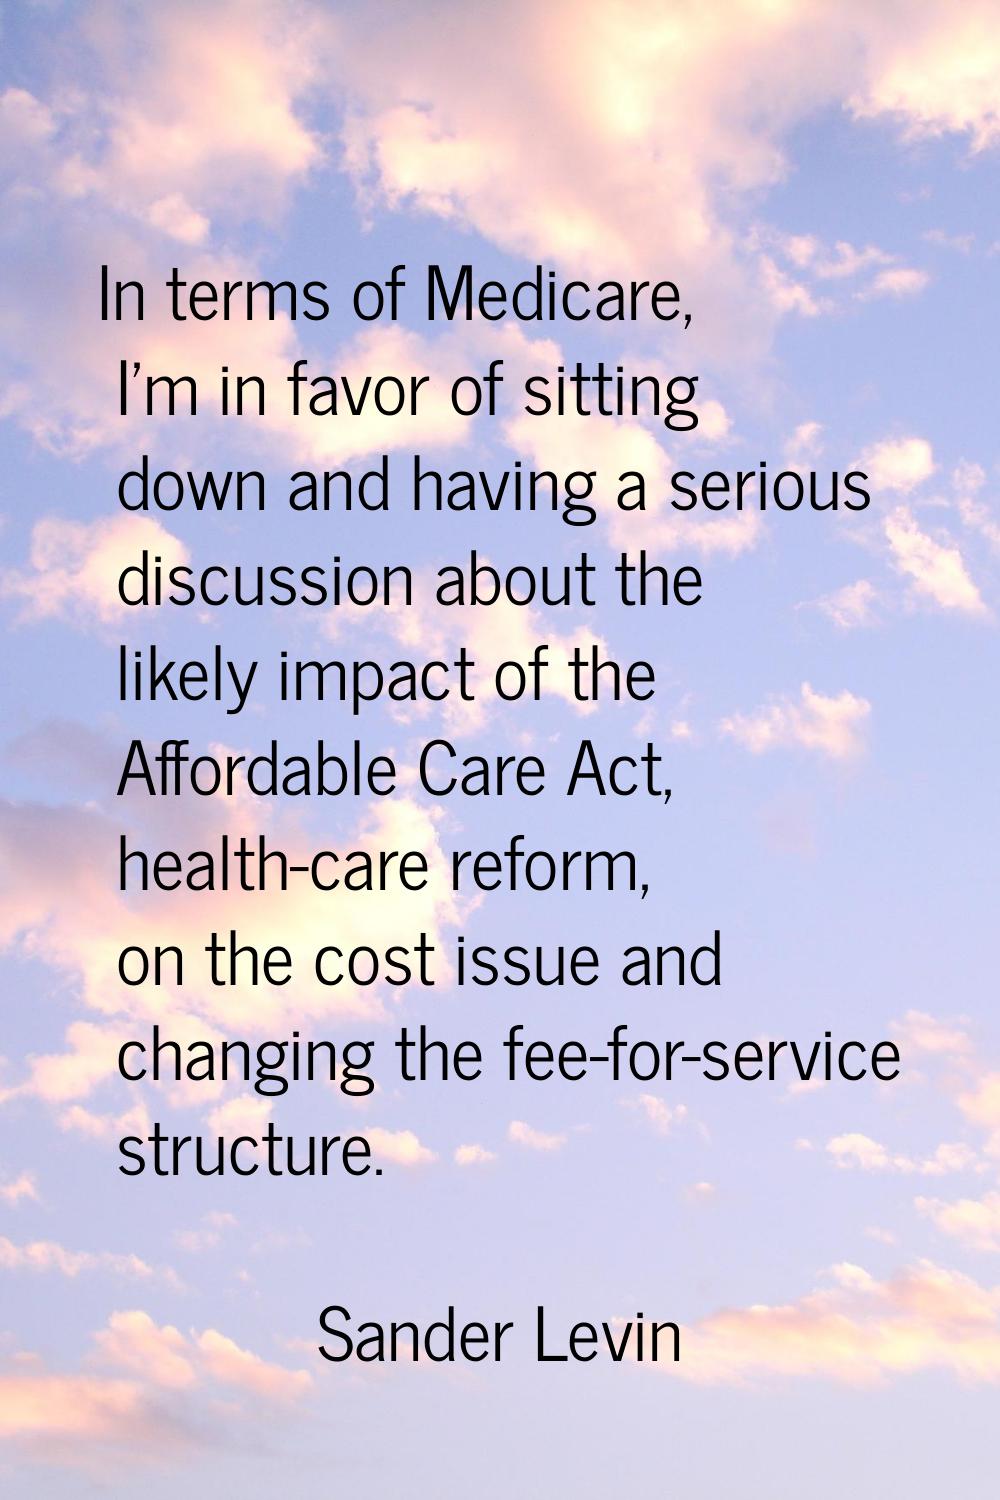 In terms of Medicare, I'm in favor of sitting down and having a serious discussion about the likely